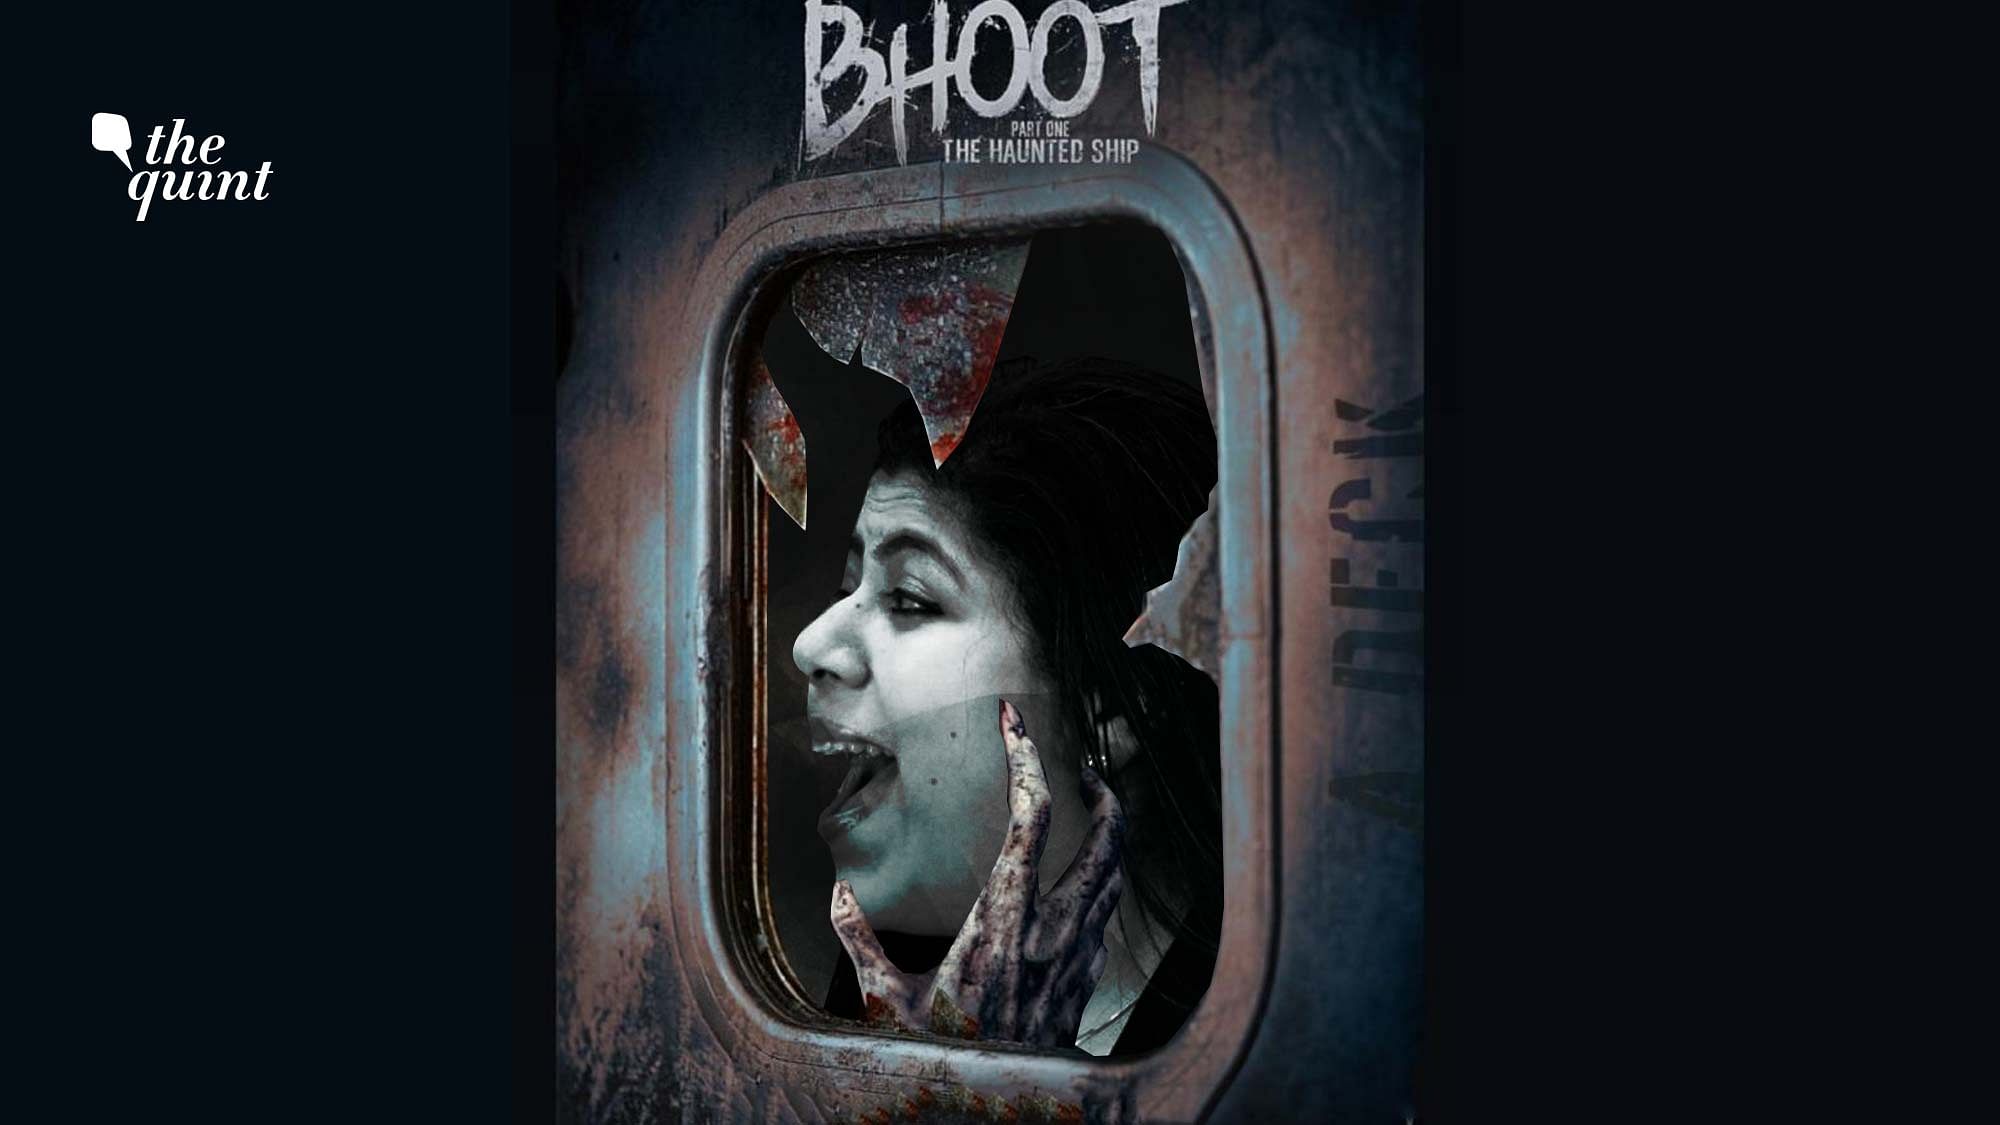 Watch RJ Stutee’s review of the film Bhoot. 